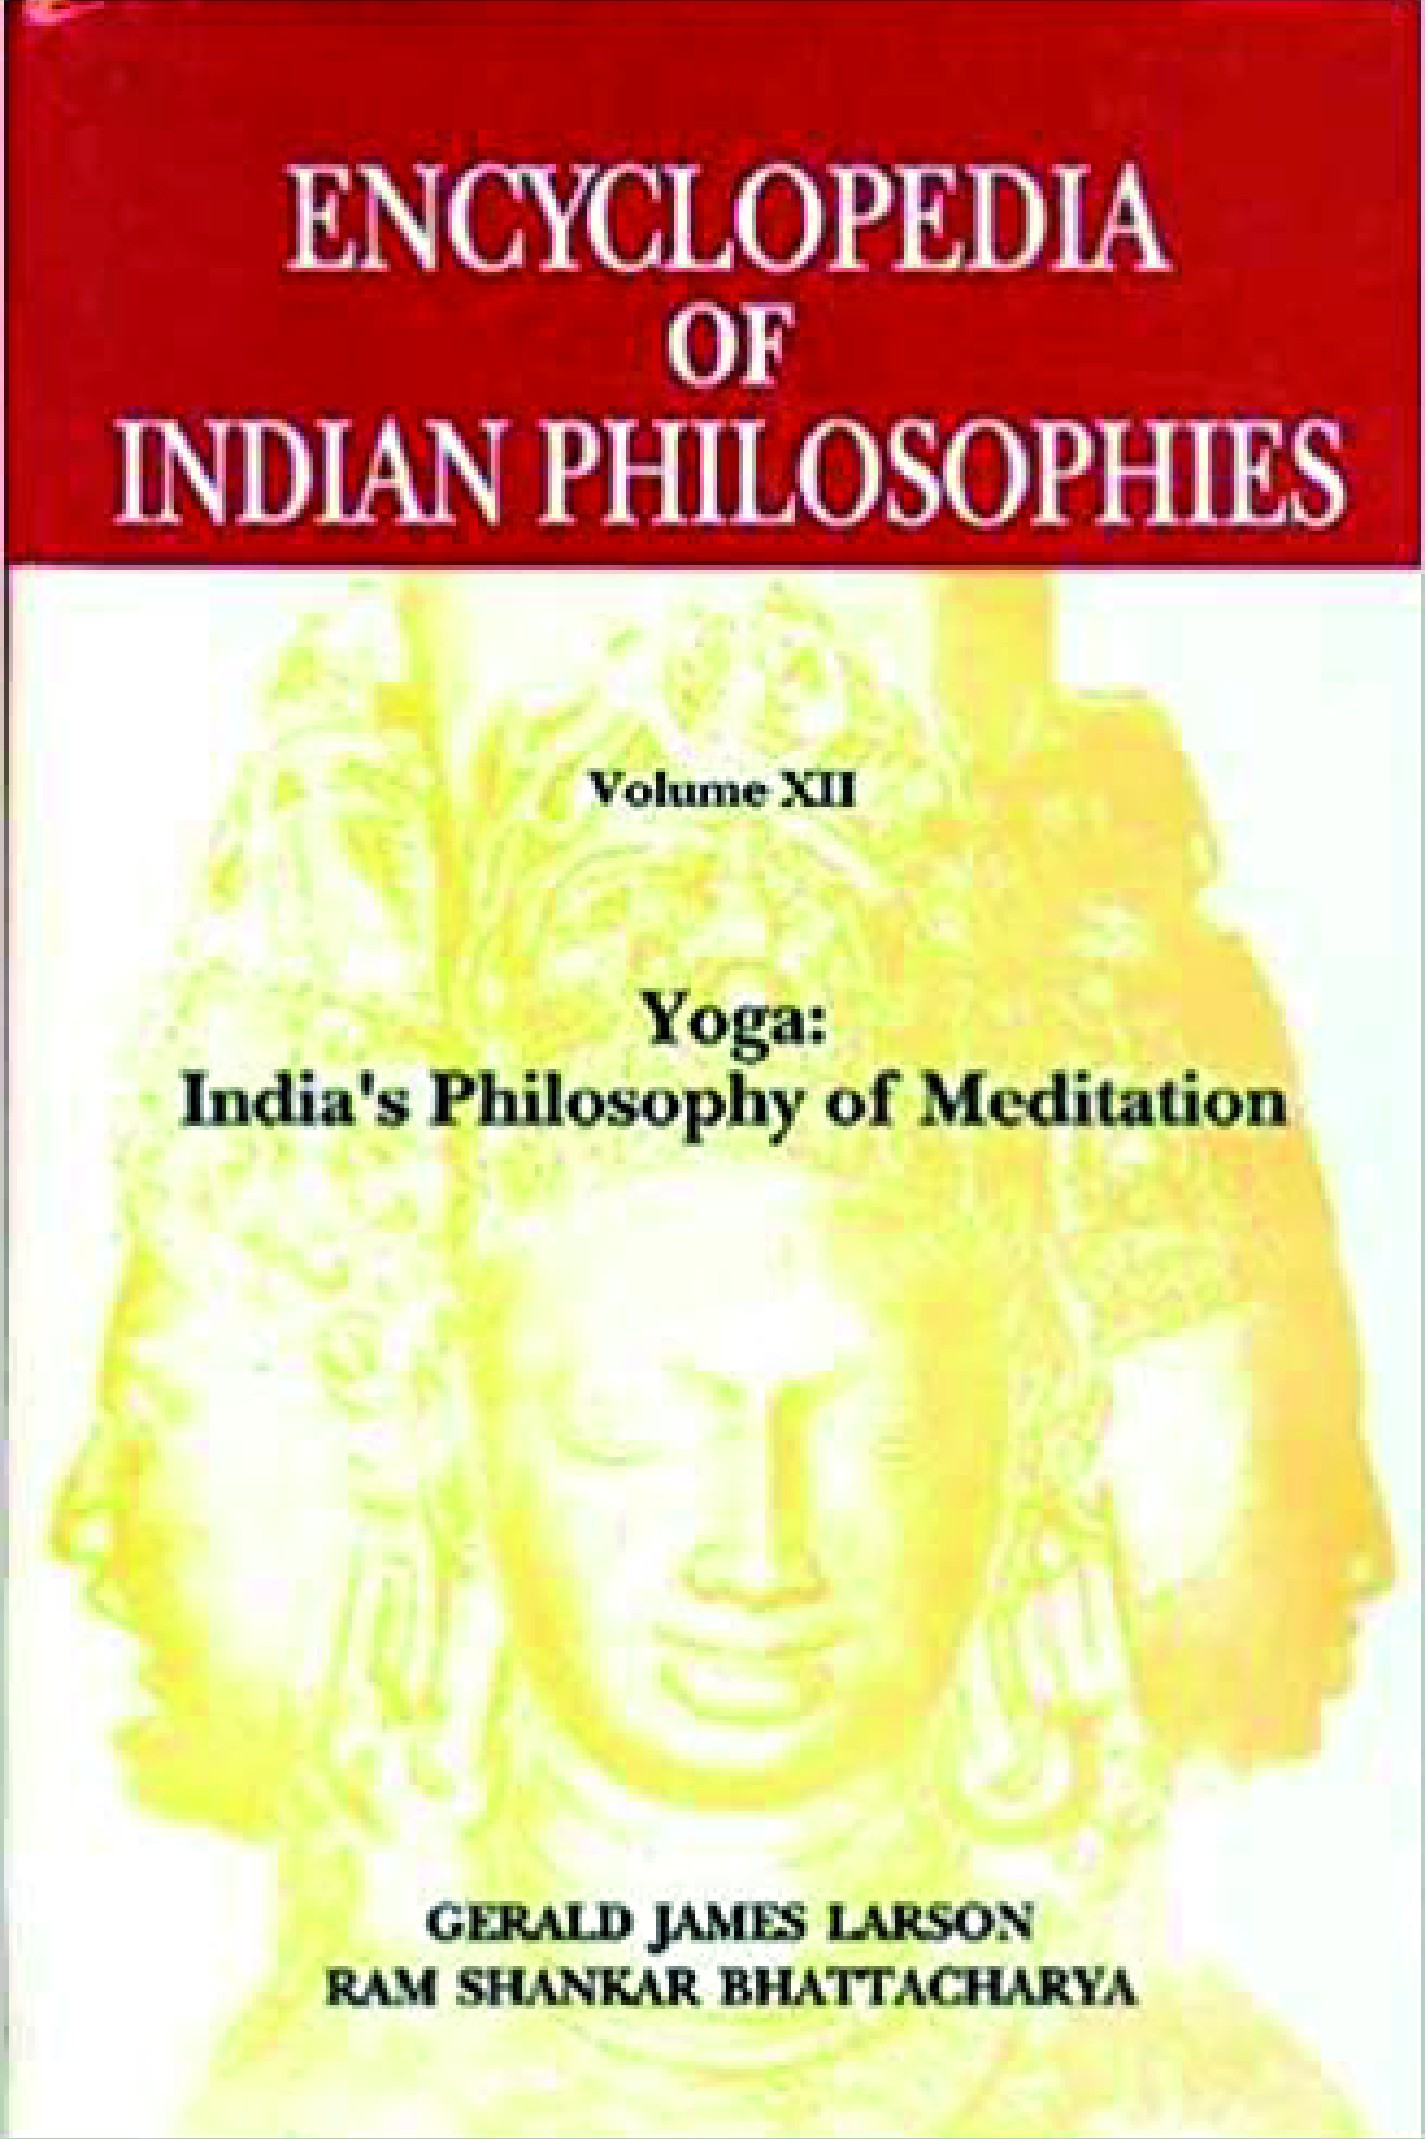 Buddhist Philosophy From 350 to 600 A.D.